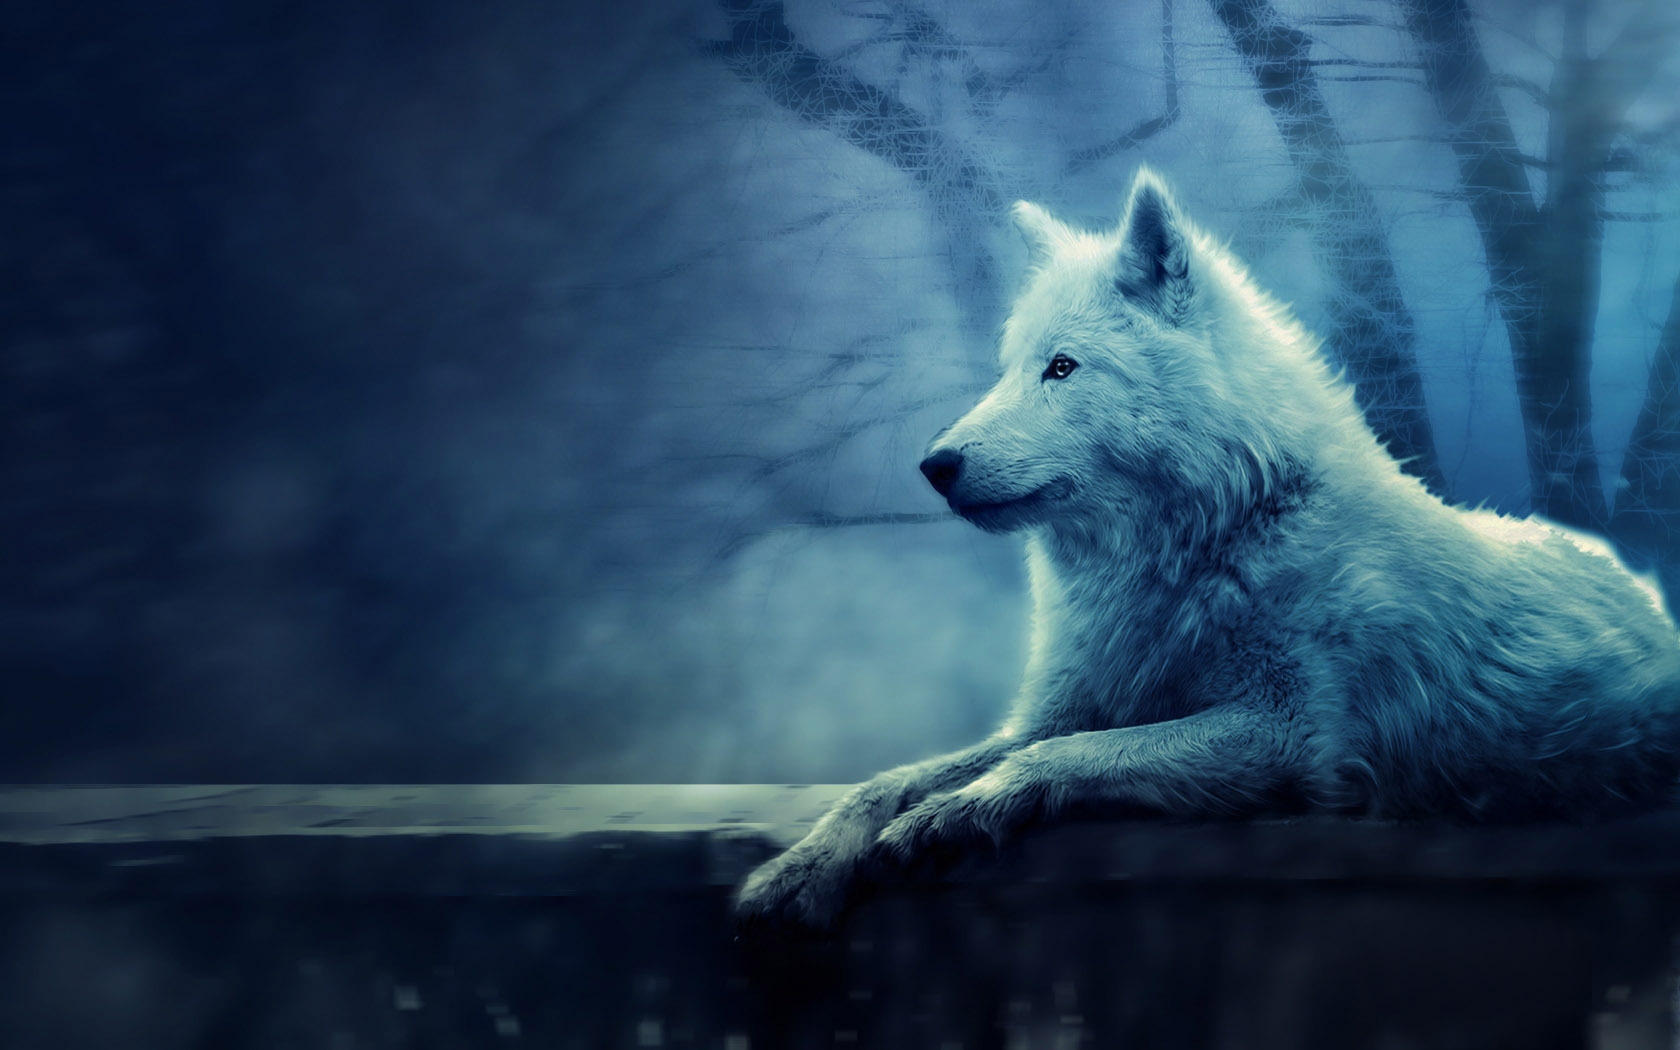 Alone wolf Wallpaper HD For Desktop, Mobile And Tablet